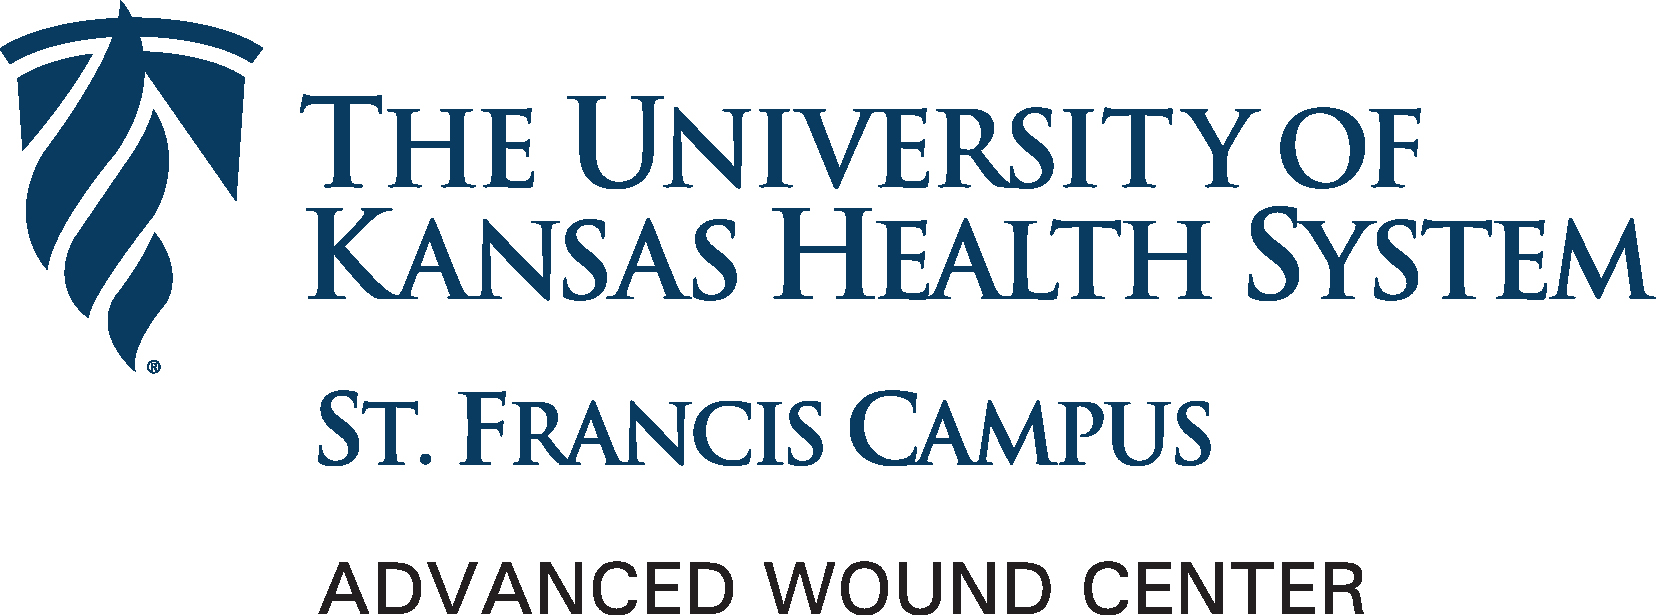 University of Kansas Health System St. Francis Campus Advanced Wound Center